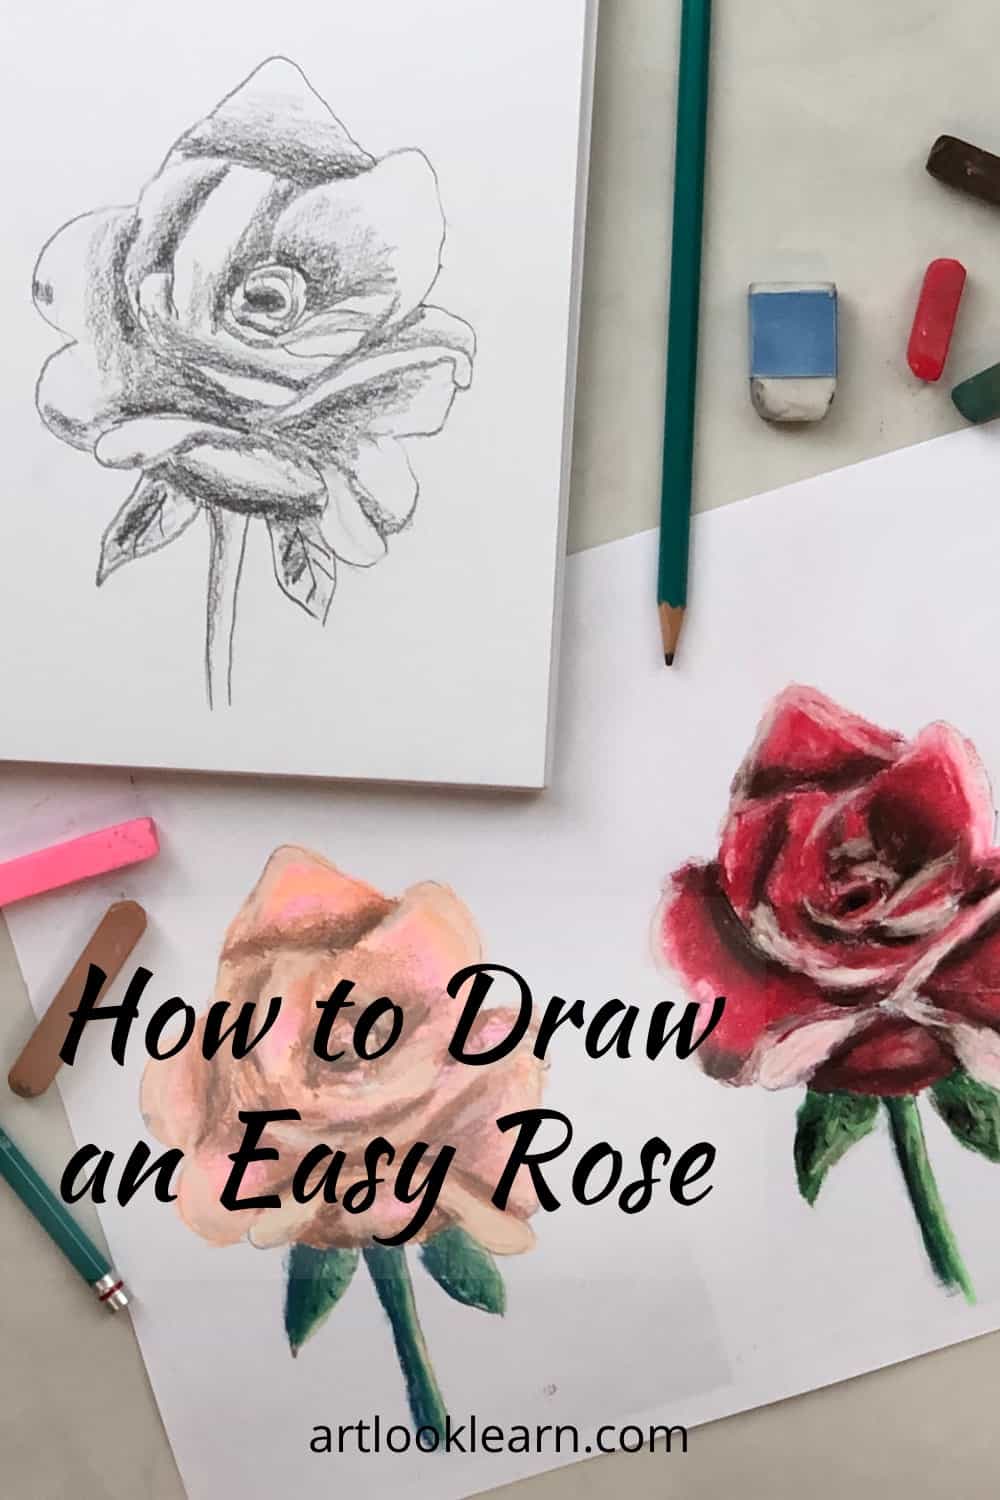 How to Draw a Rose Using a Pencil or Charcoal Step By Step